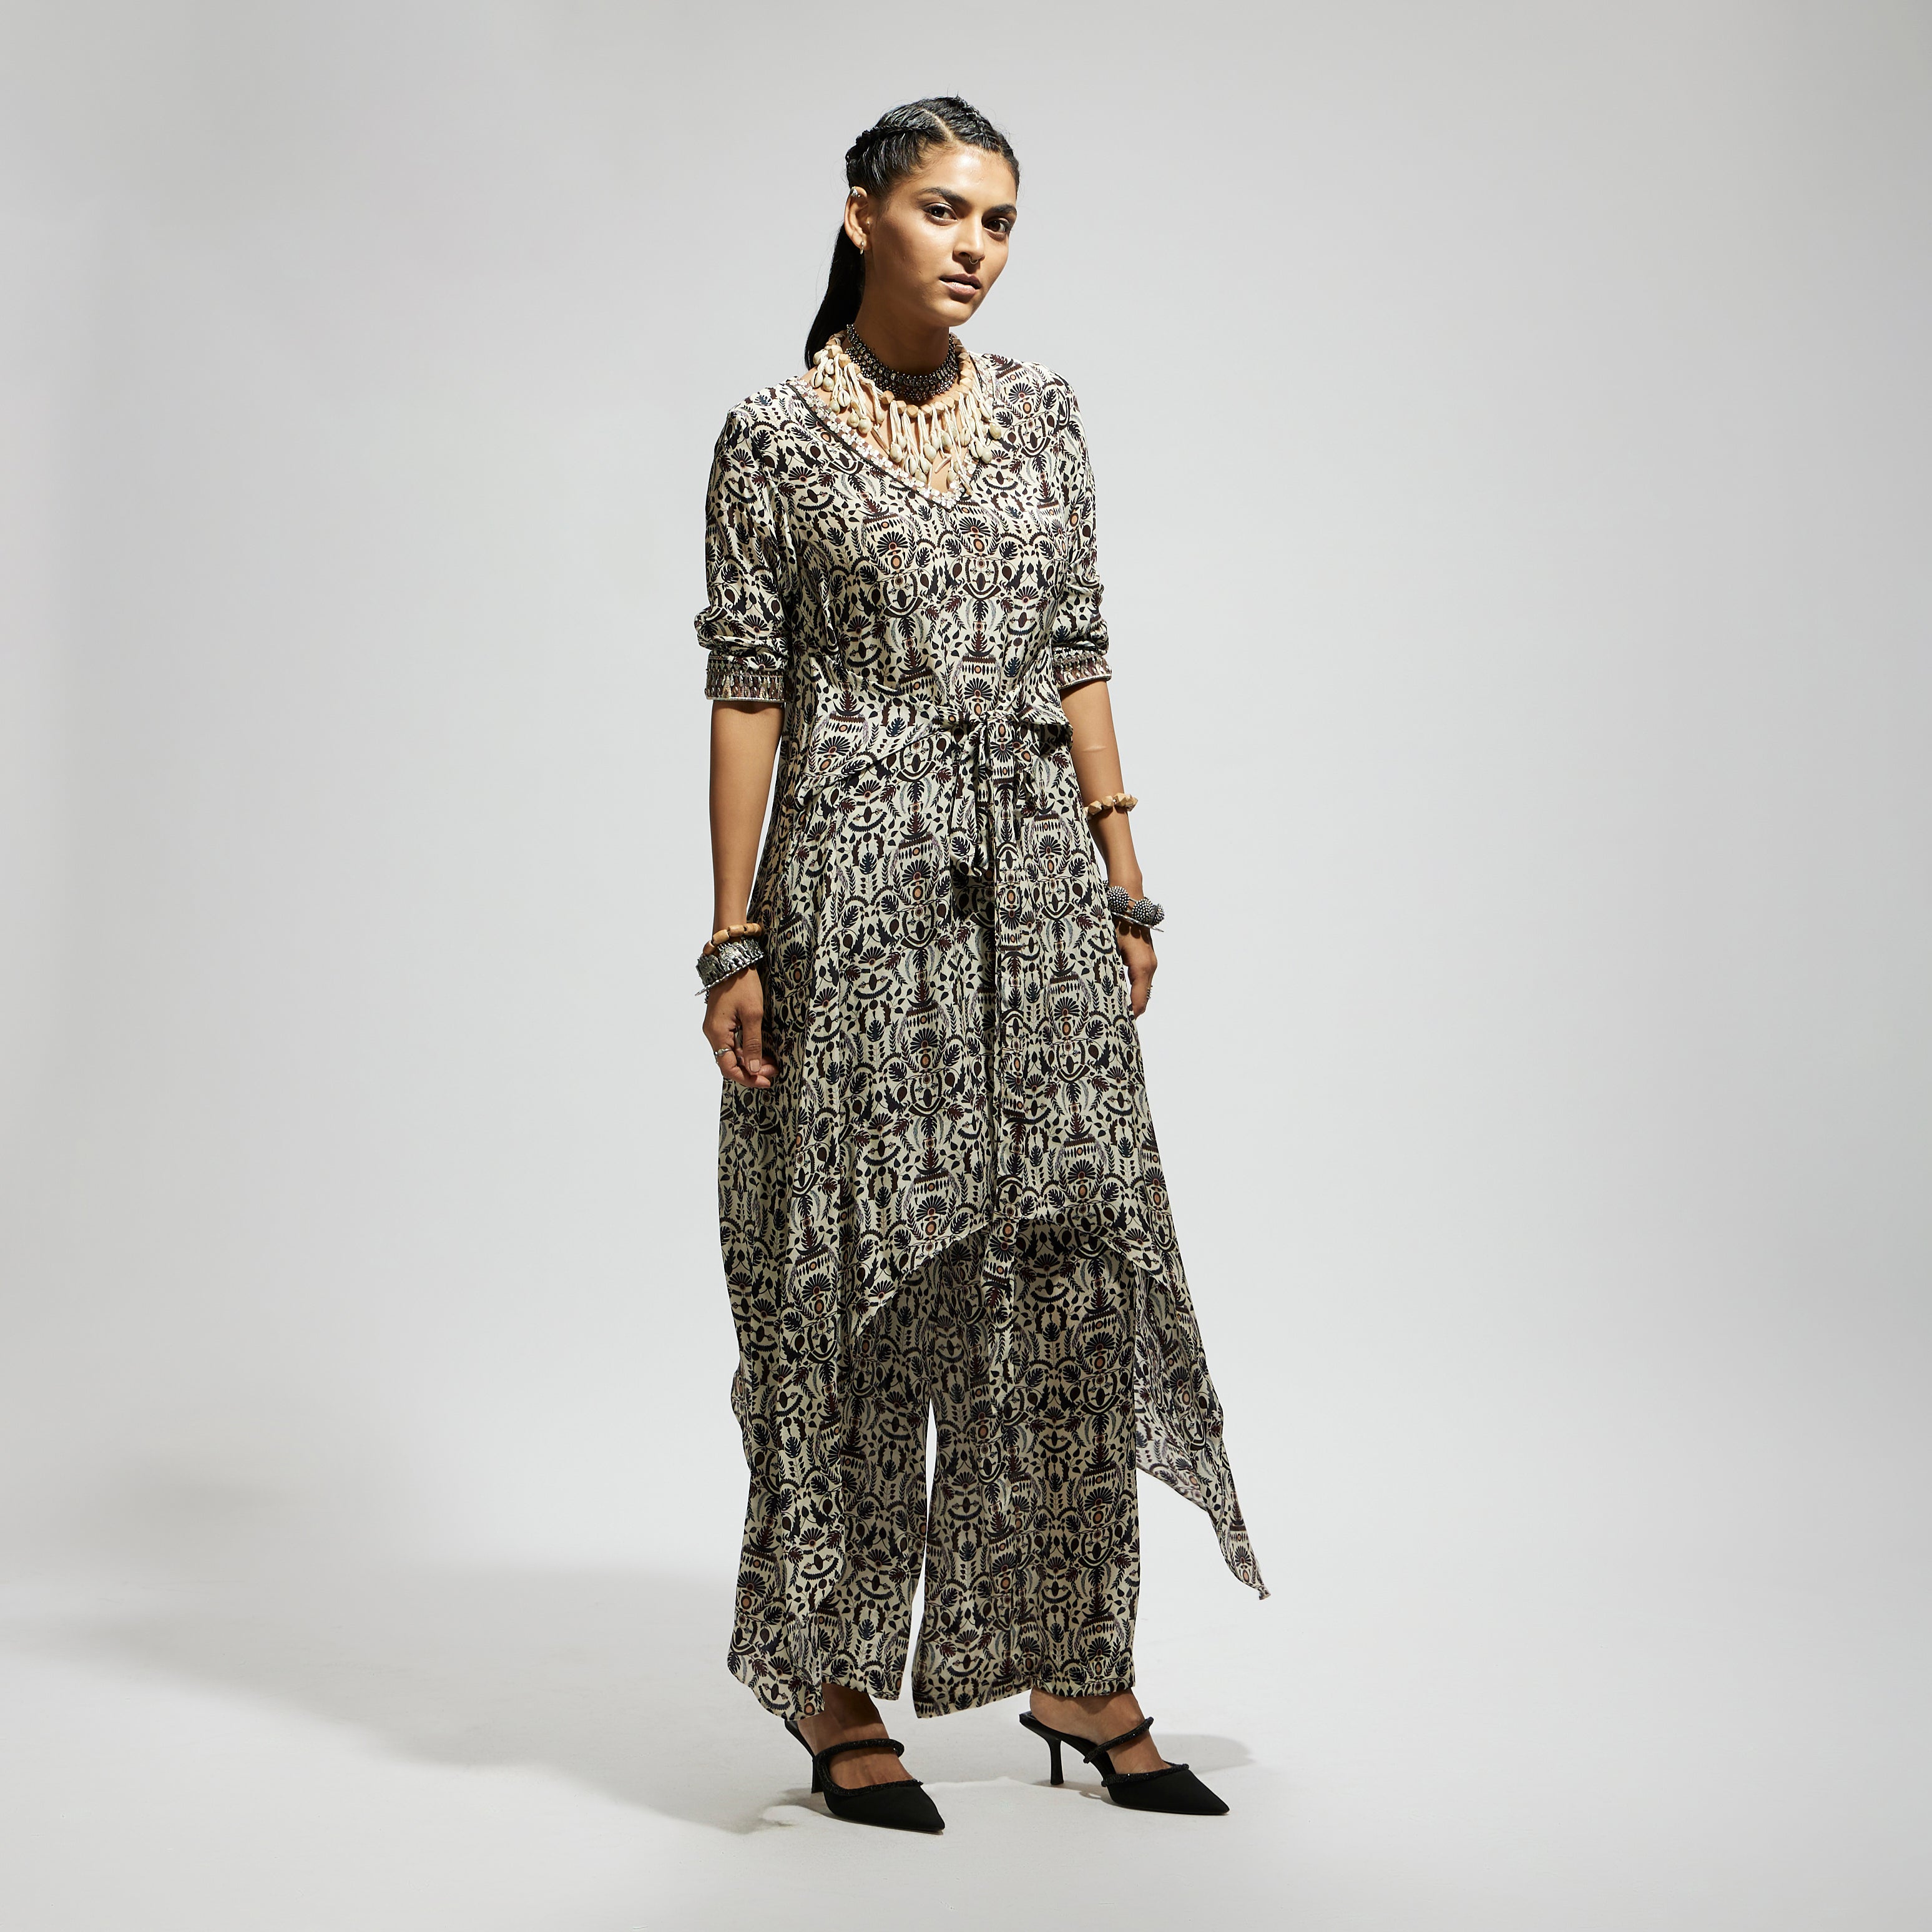 WHITE JAAL PRINT FRONT TIE UP TUNIC